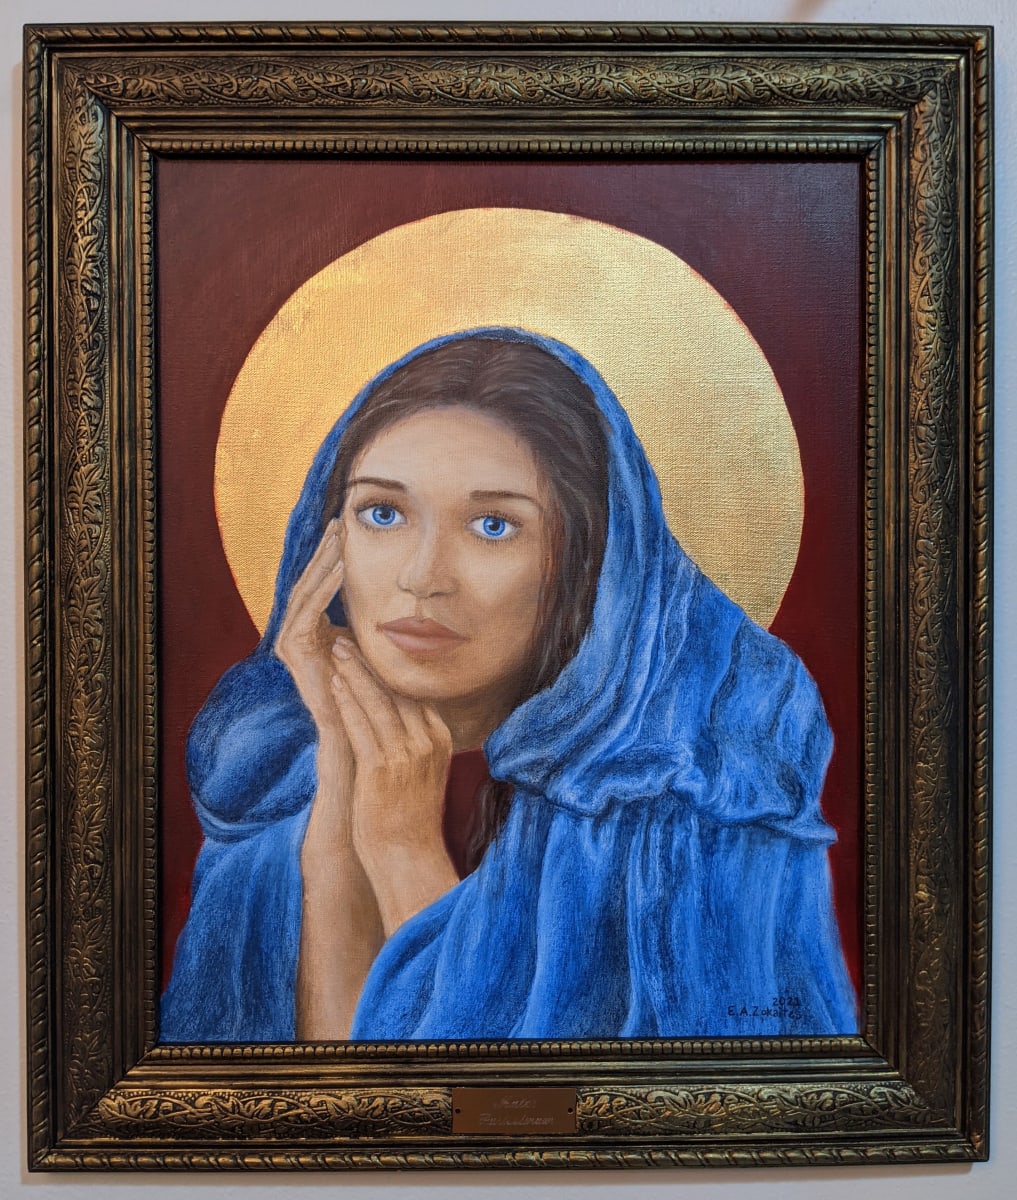 Mater Purissimum (Pure Mother) by Elizabeth A. Zokaites  Image: Mother Mary